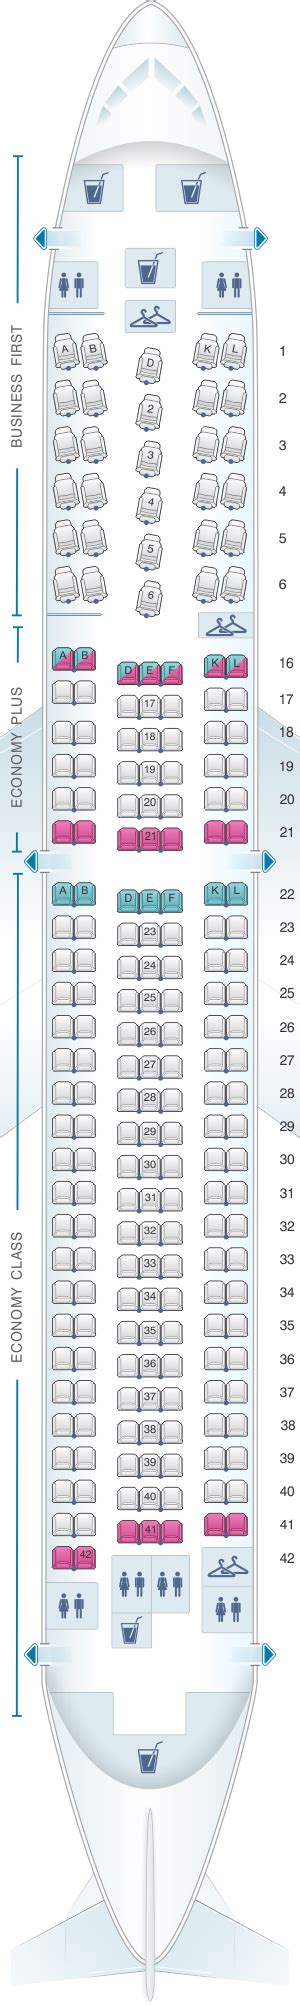 Seat Map United Airlines Boeing B767 300er Version 2